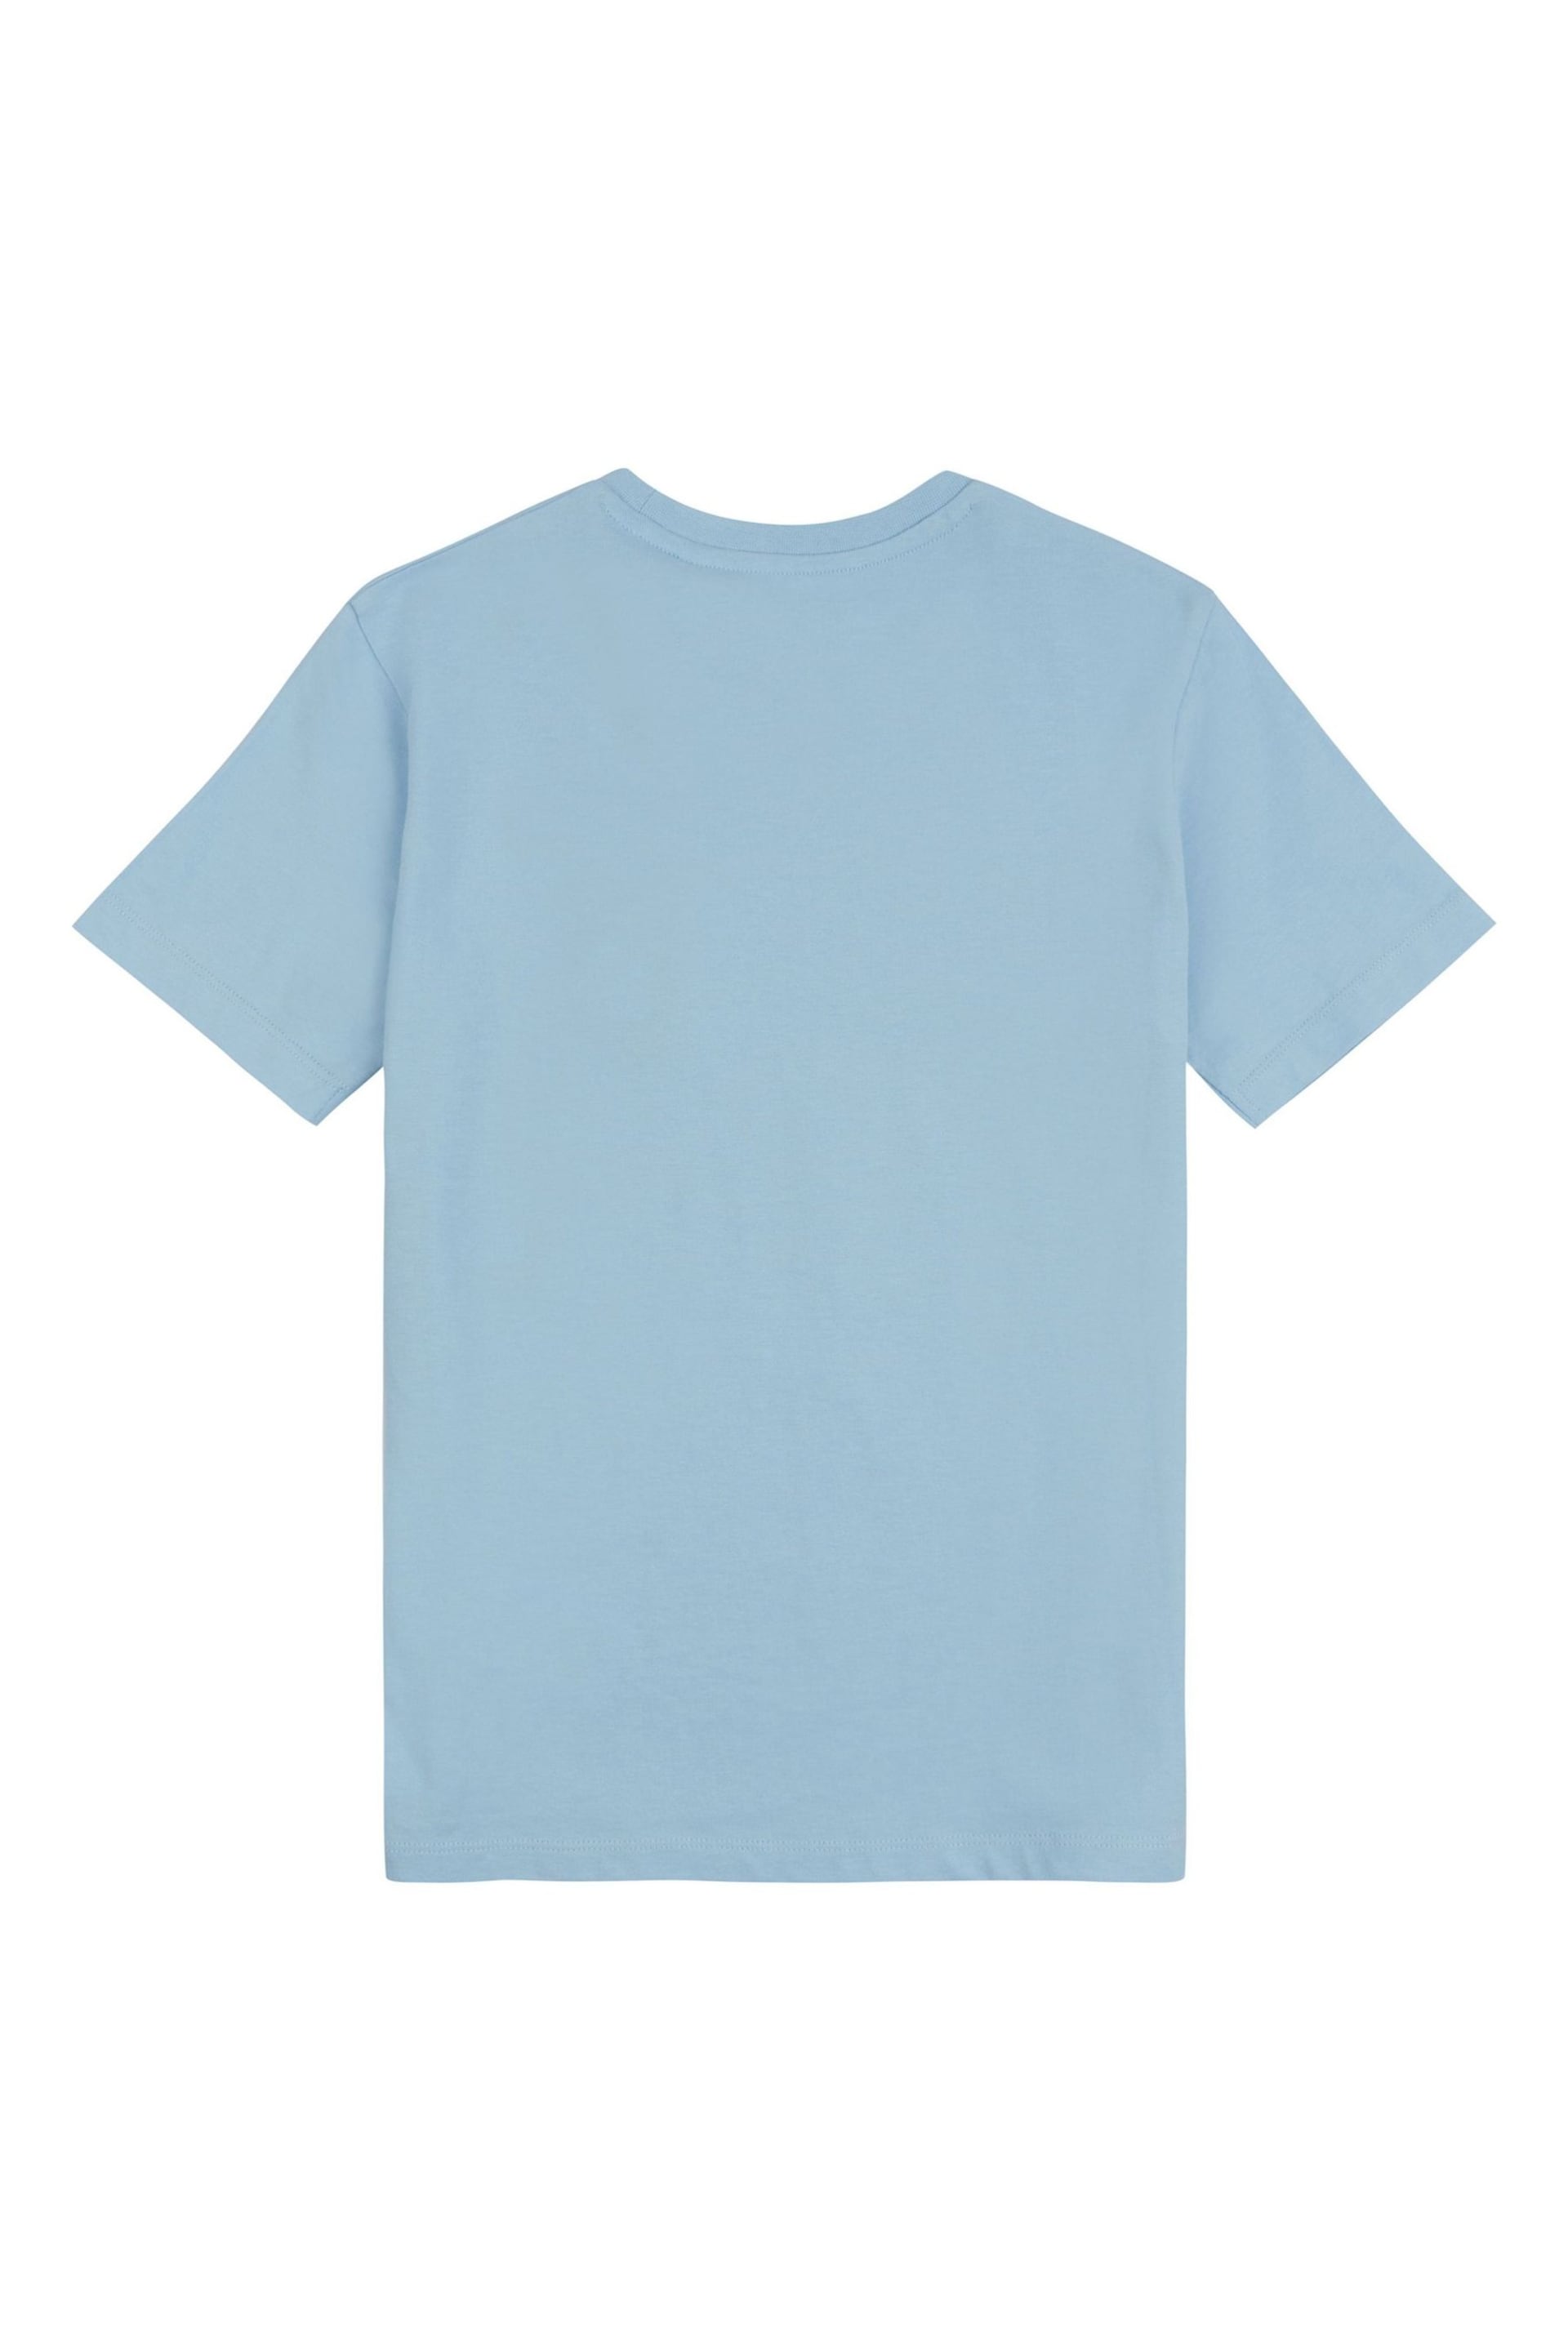 Jack Wills Boys Regular Fit Carnaby T-Shirt - Image 5 of 6